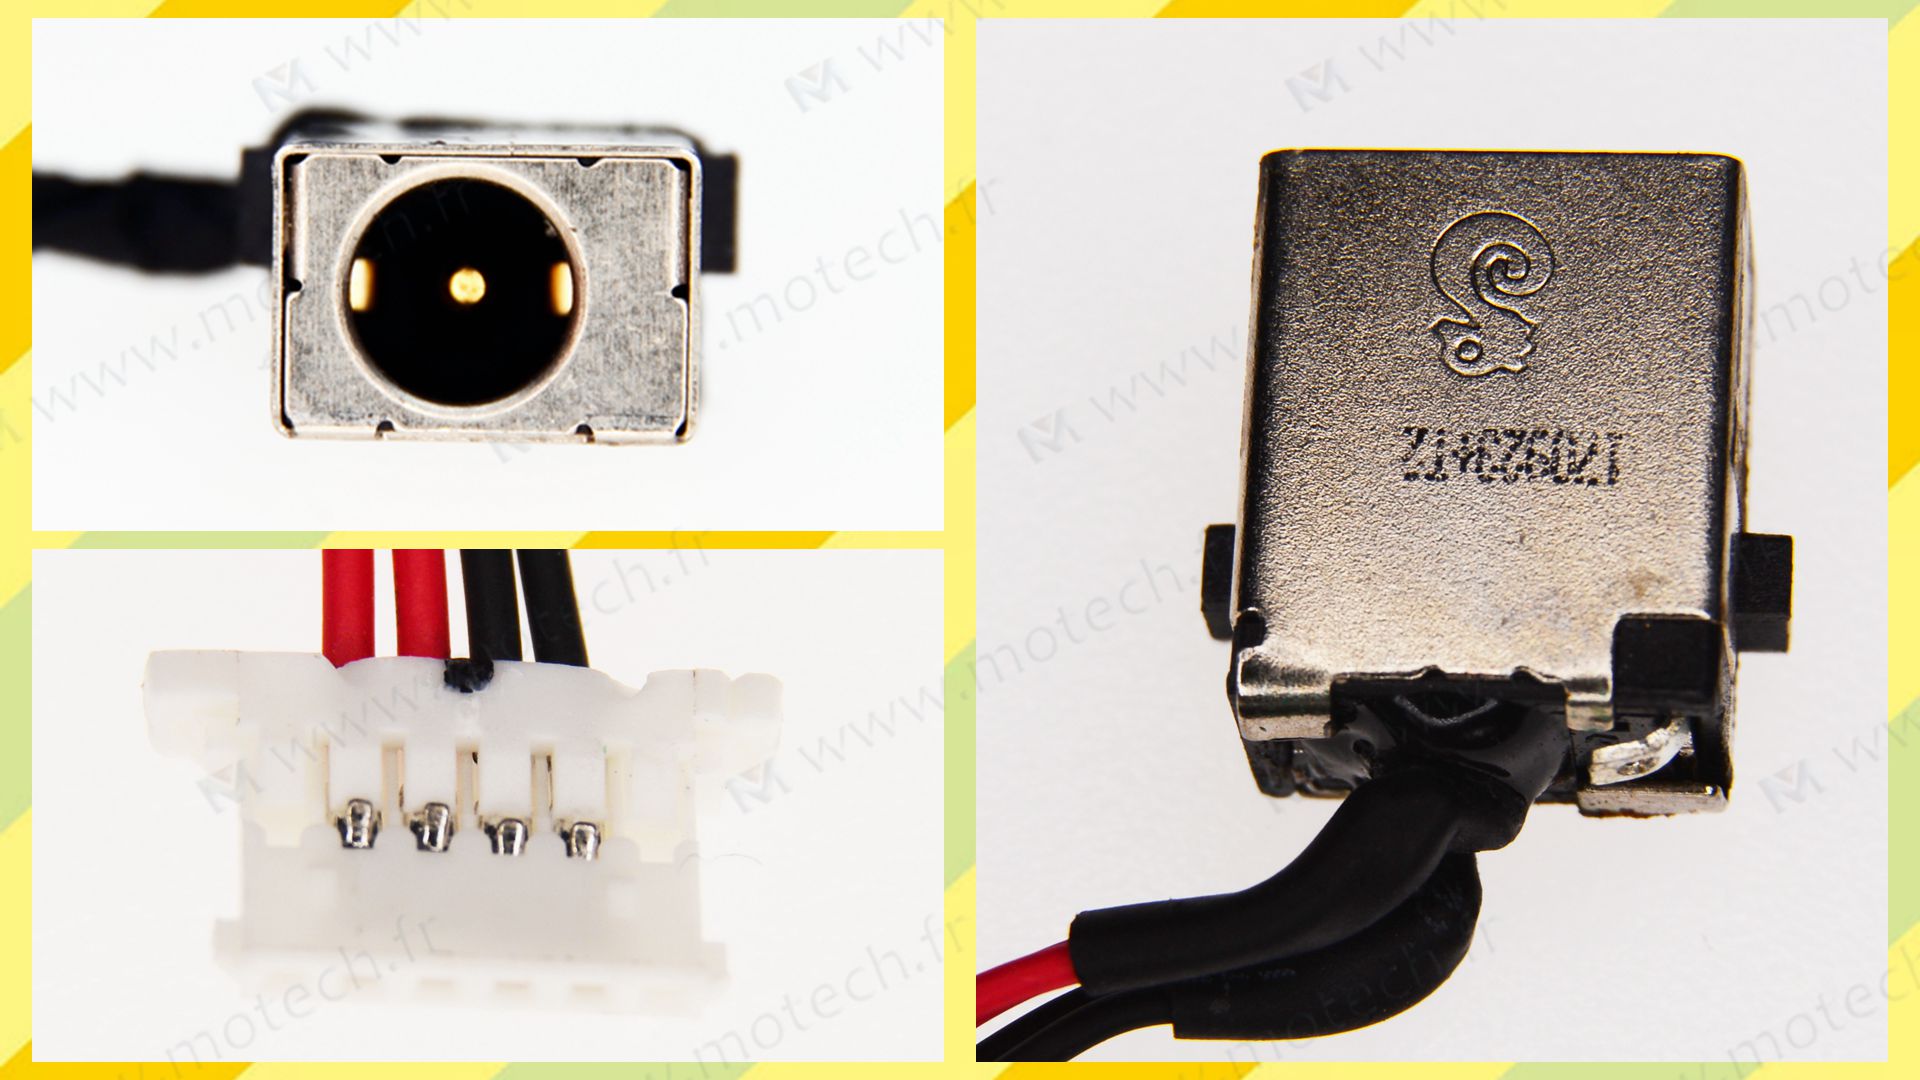 Acer A114-31 charging connector, Acer A114-31 DC Power Jack, Acer A114-31 DC IN Cable, Acer A114-31 Power Jack, Acer A114-31 plug, Acer A114-31 Jack socket, Acer A114-31 connecteur de charge, 